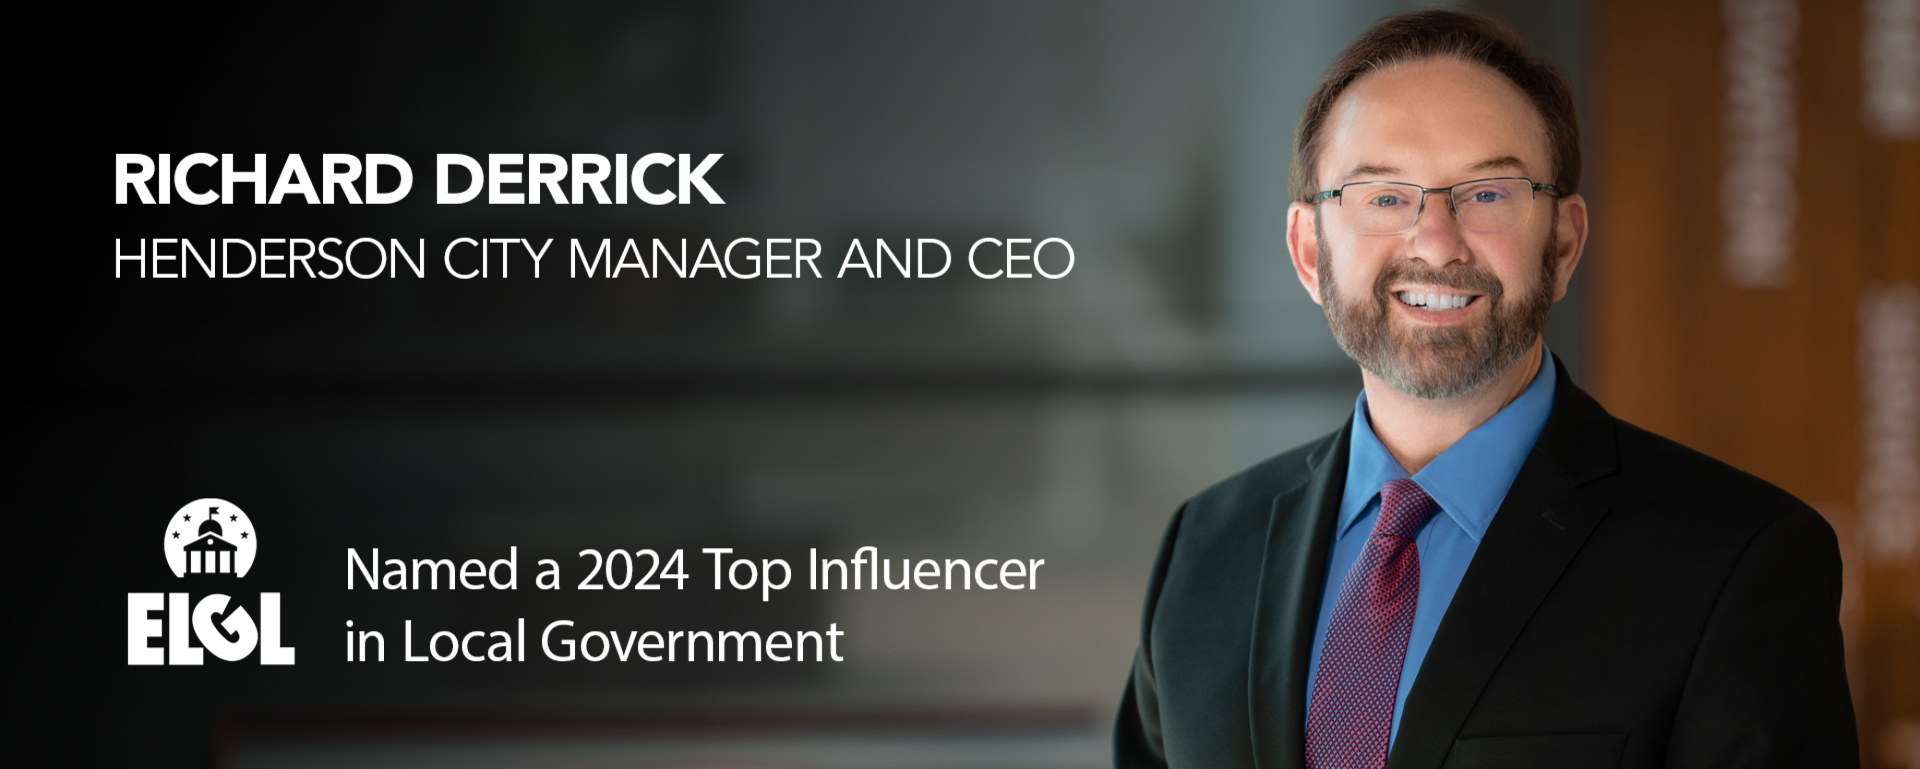 Derrick Top Influencers in Local Government ELGL Web Banner